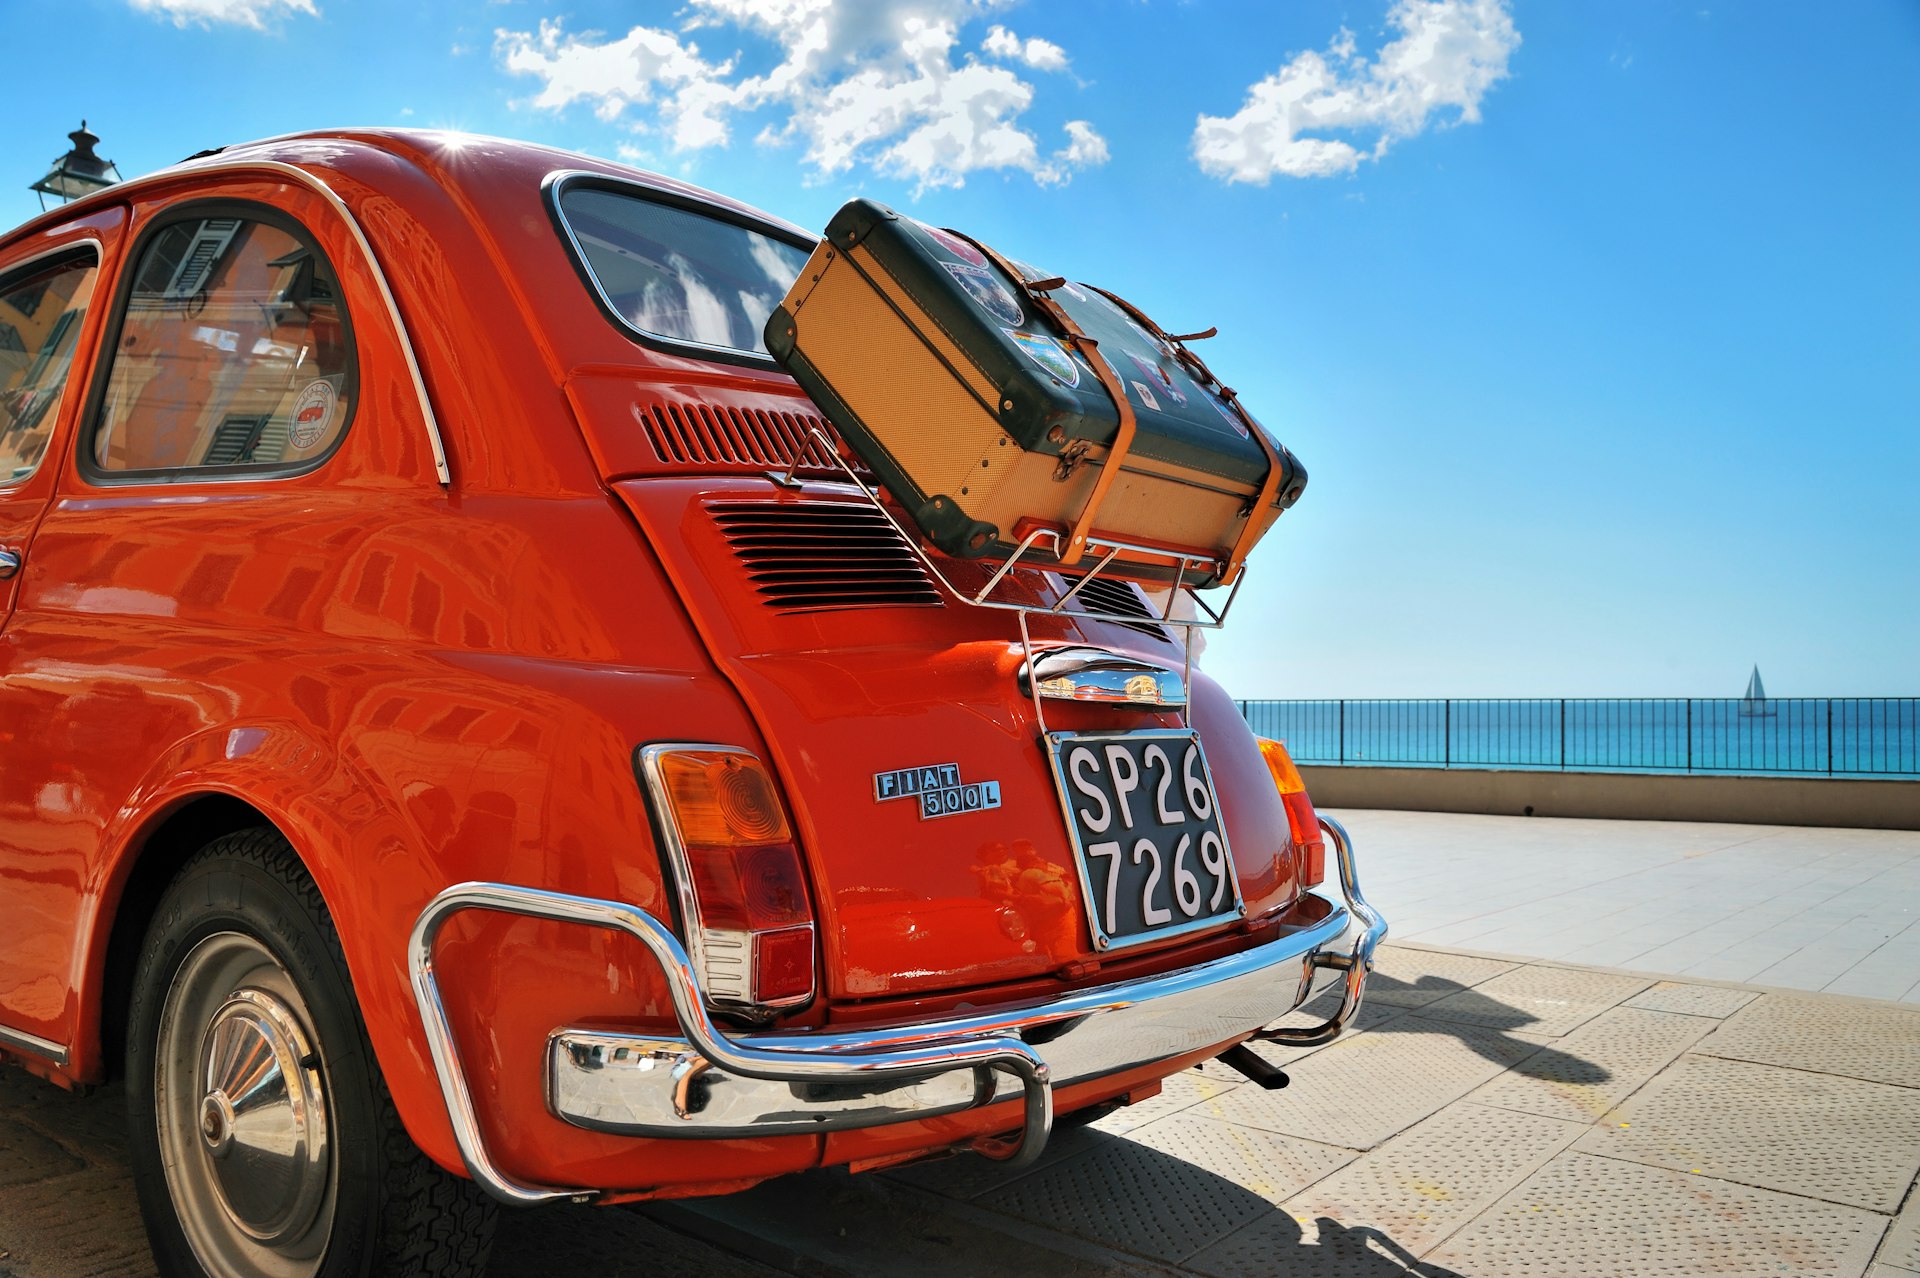 A small old style Fiat 500L car with a suitcase strapped to the back of it